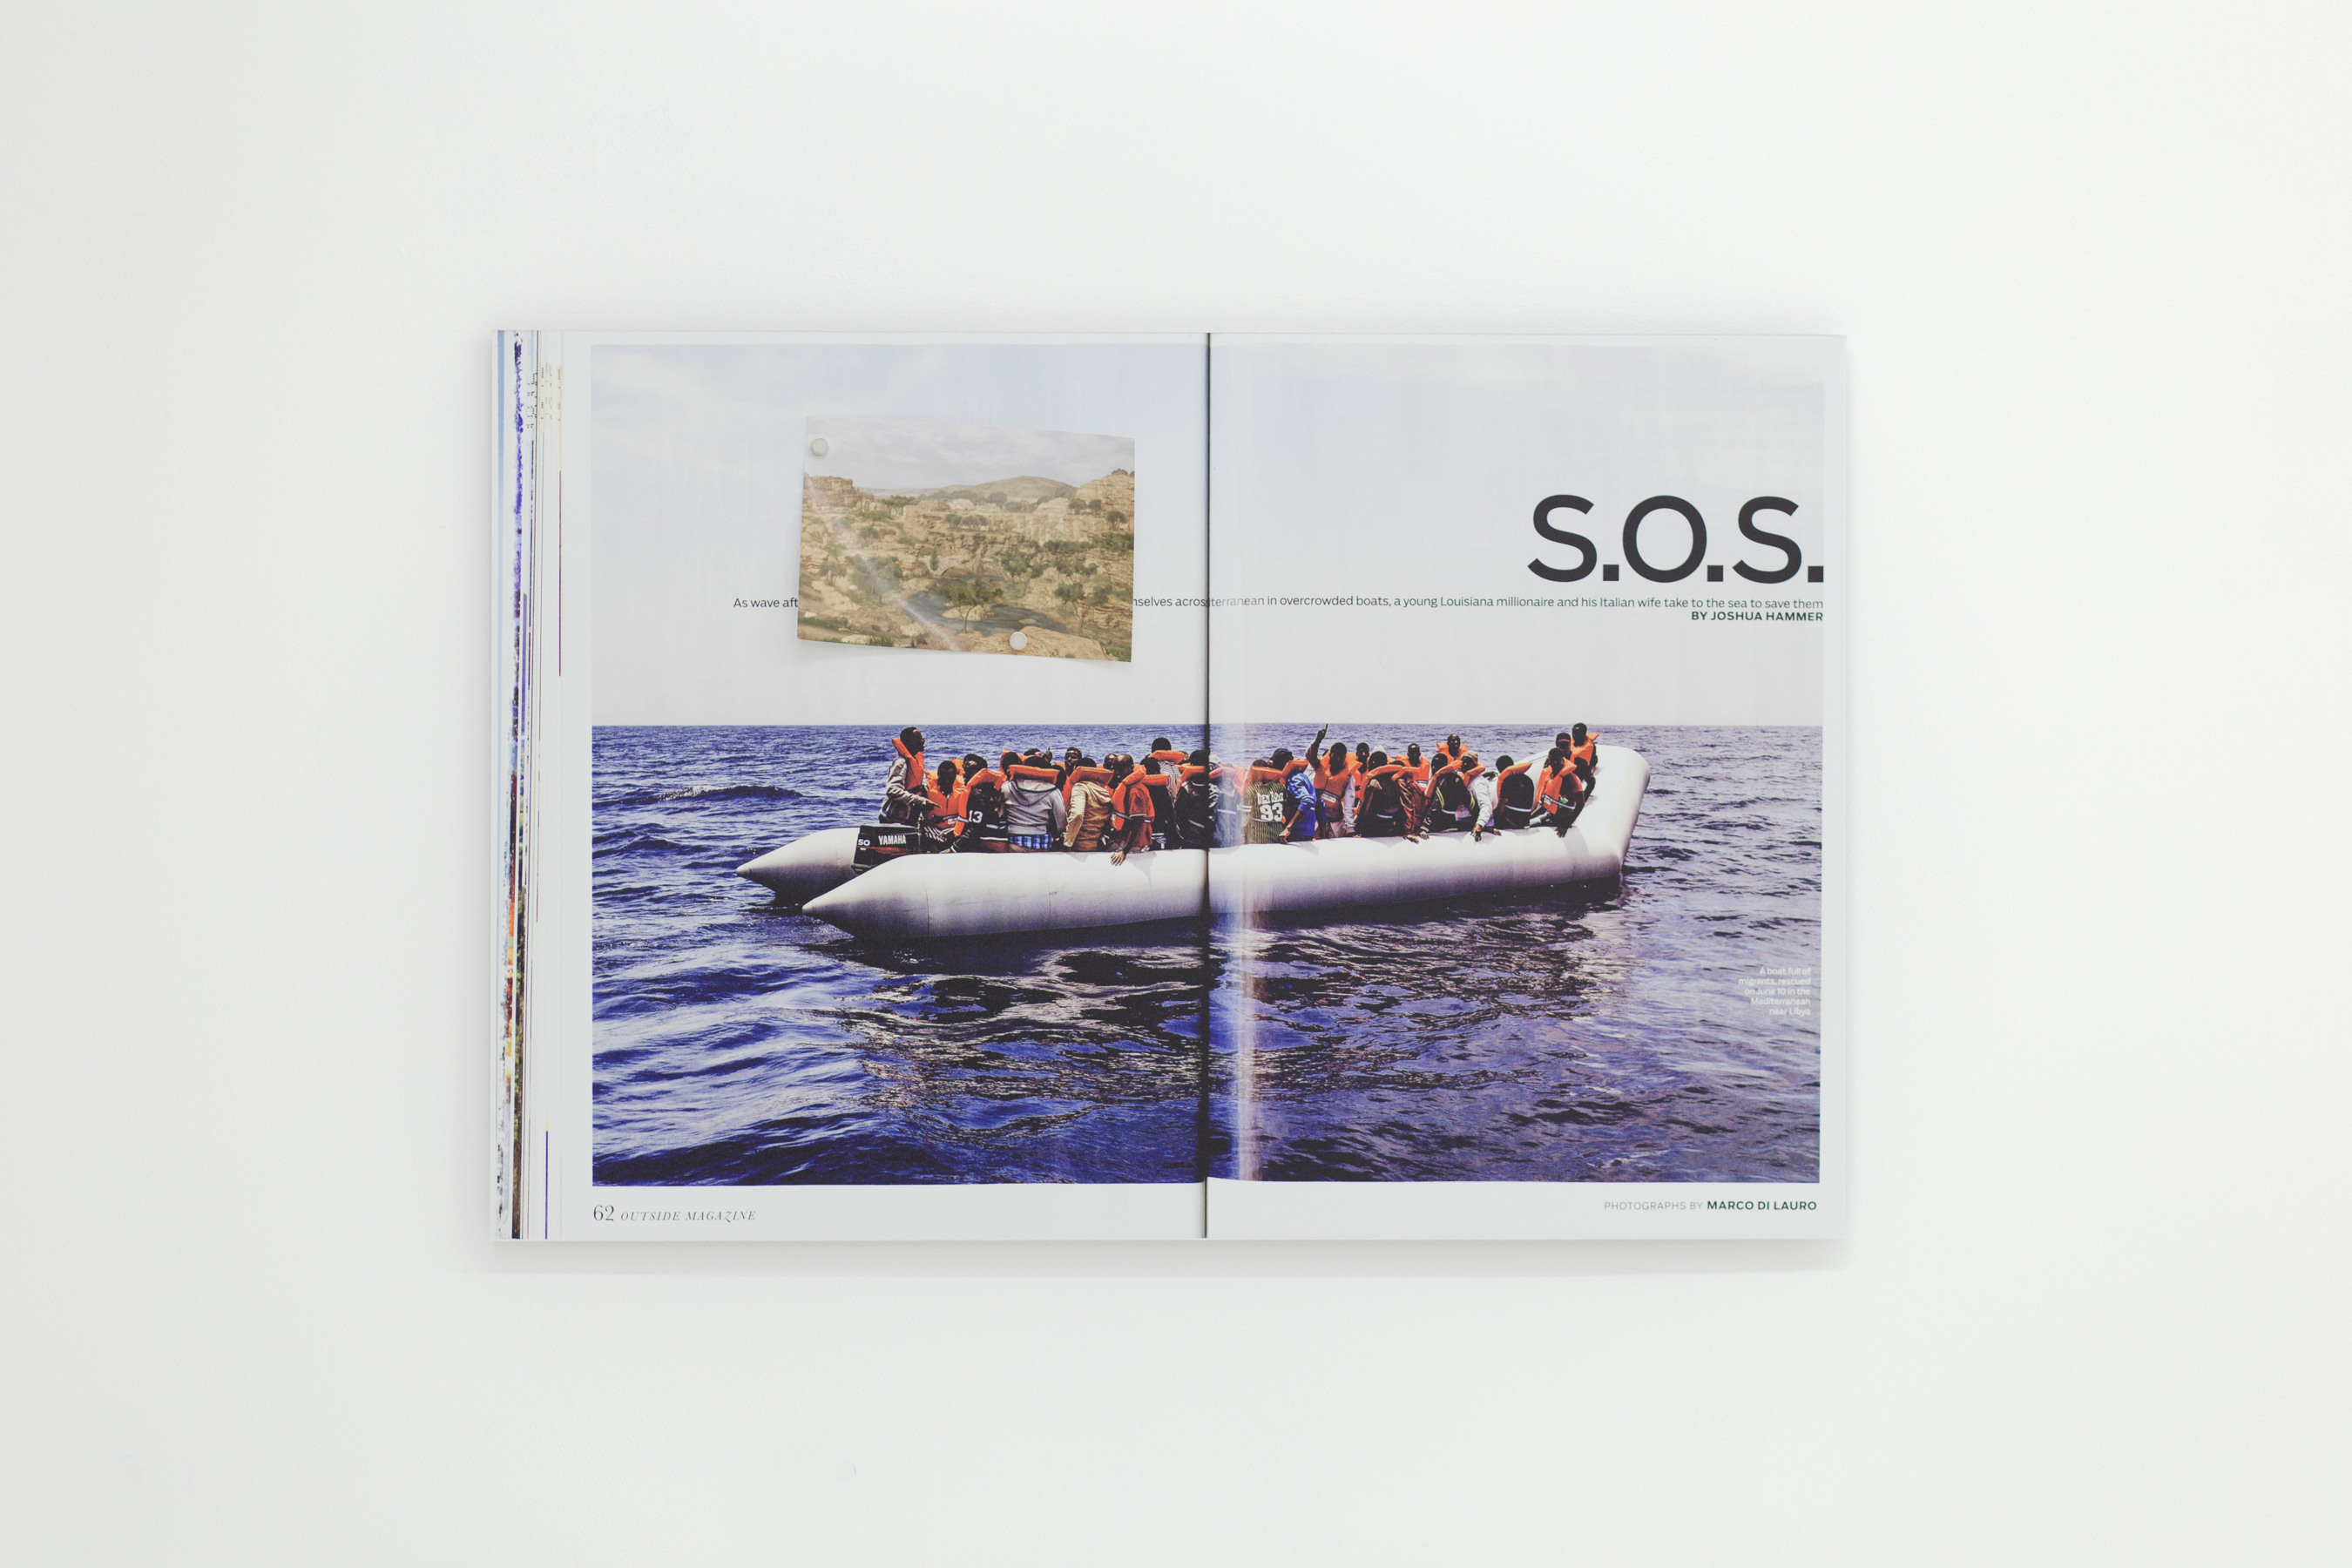 Print of a magazine spread on aluminum depicting people in life vests on a raft. There is a small photo attached to the print by magnet